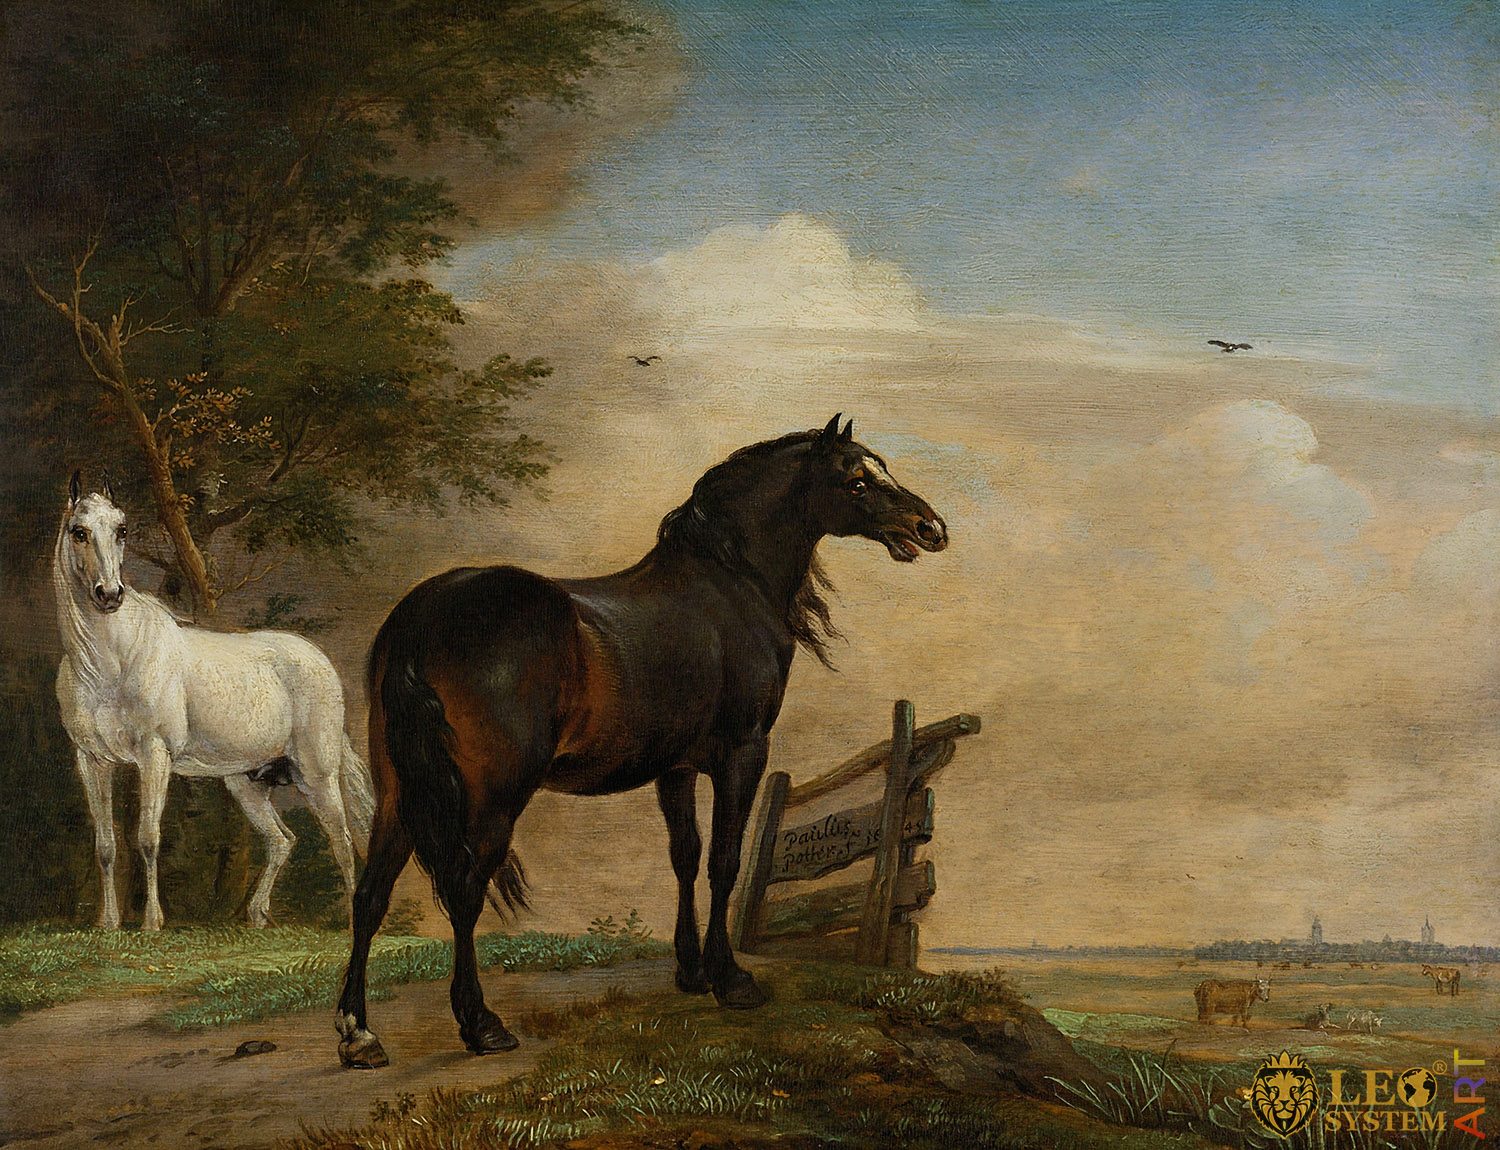 Two Horses in a Meadow Near a Gate, Painter: Paulus Potter, 1649, Original Painting